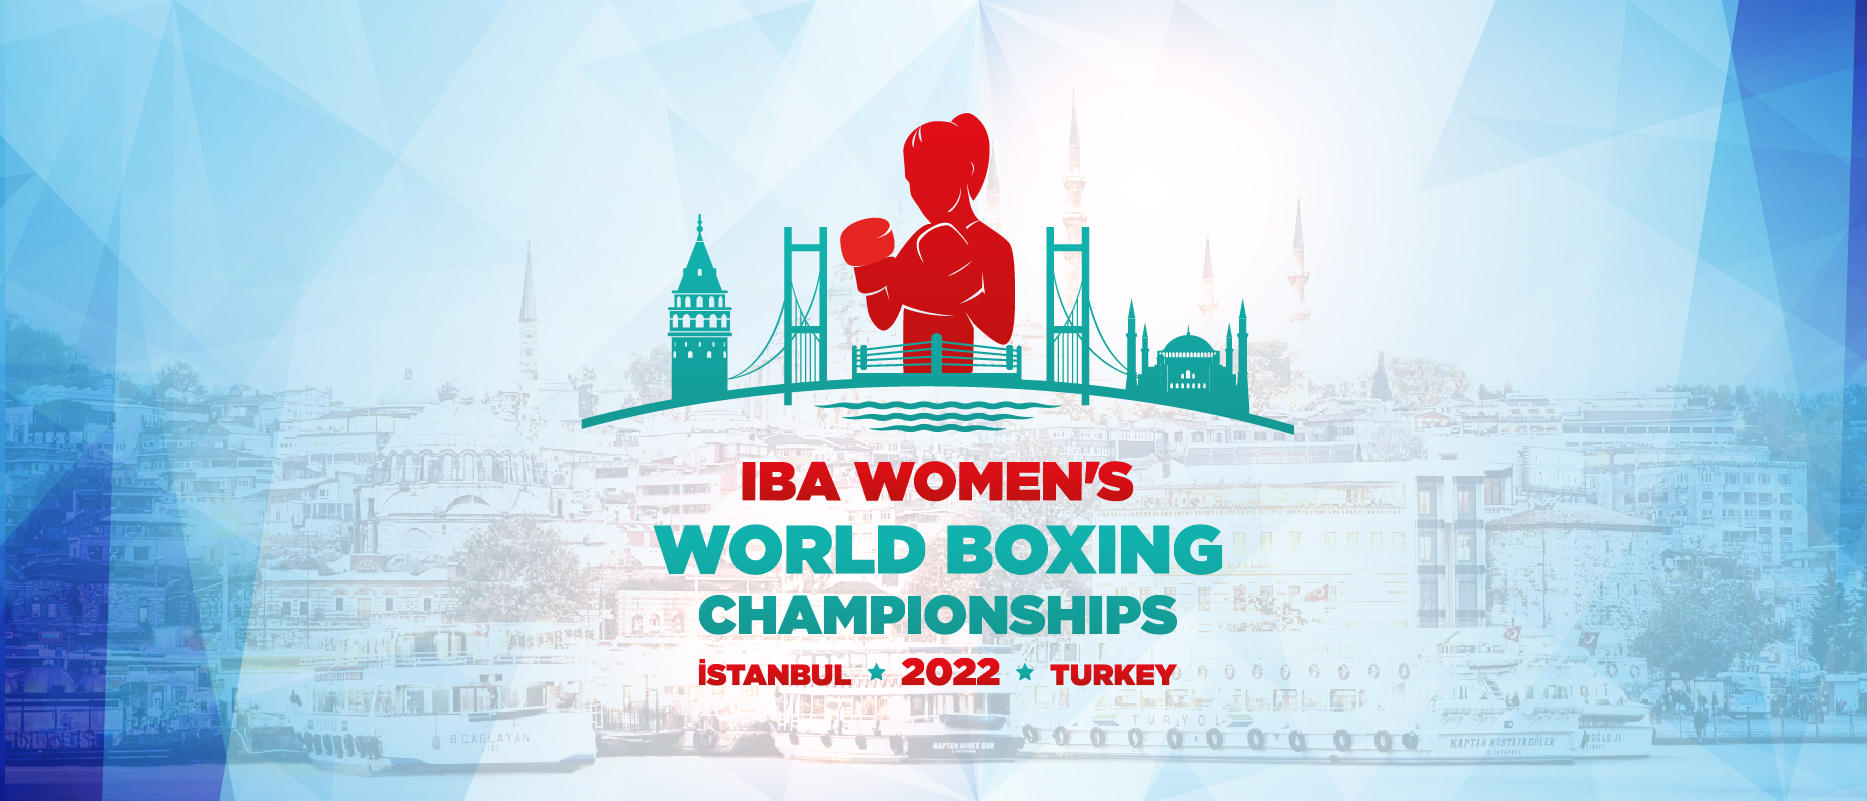 IBA Women's World Boxing Championships: Turkey topped medal tally of 2022_30.1